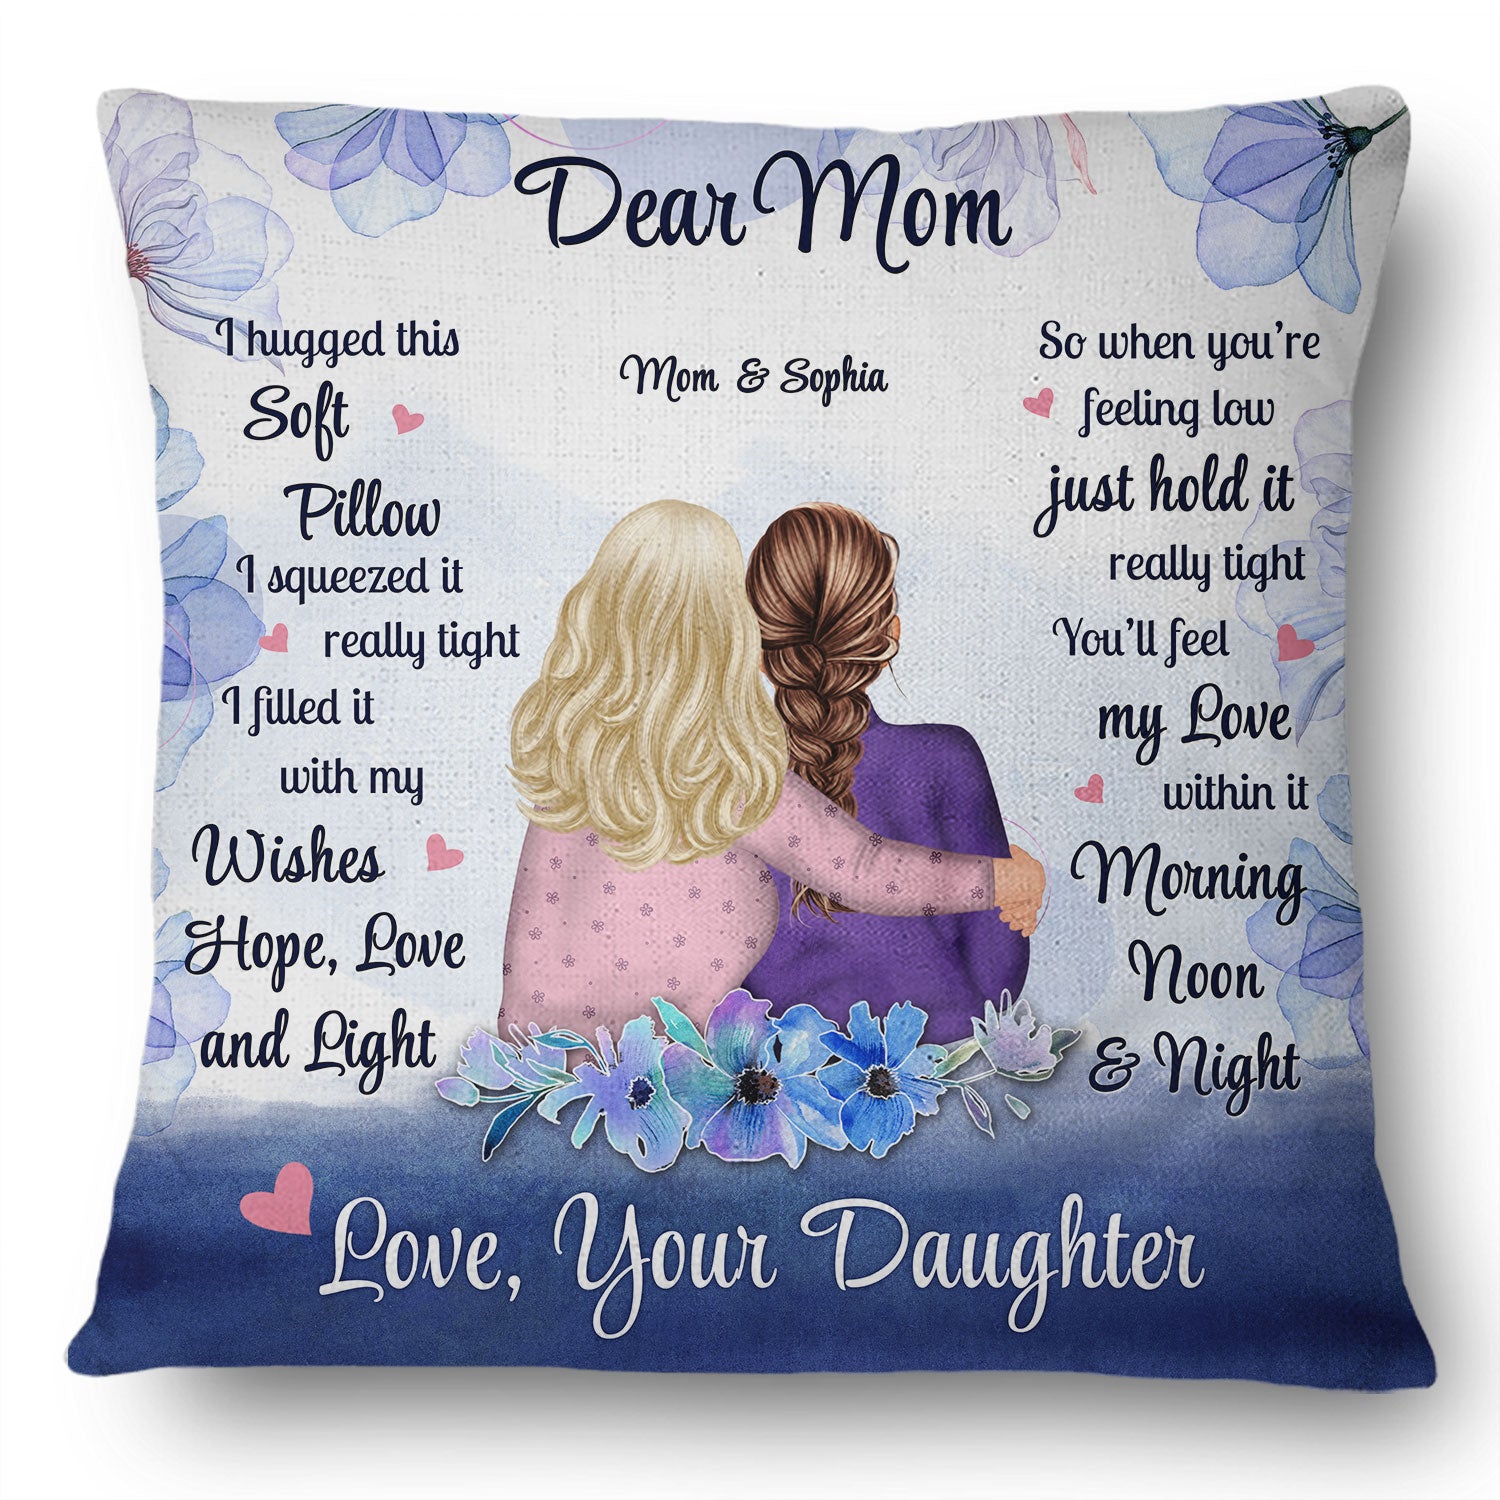 I Hugged This Soft Pillow Morning, Noon And Night Watercolor Style - Birthday, Loving Gift For Mom, Mother, Grandma, Grandmother, Daughter, Granddaughter - Personalized Custom Pillow